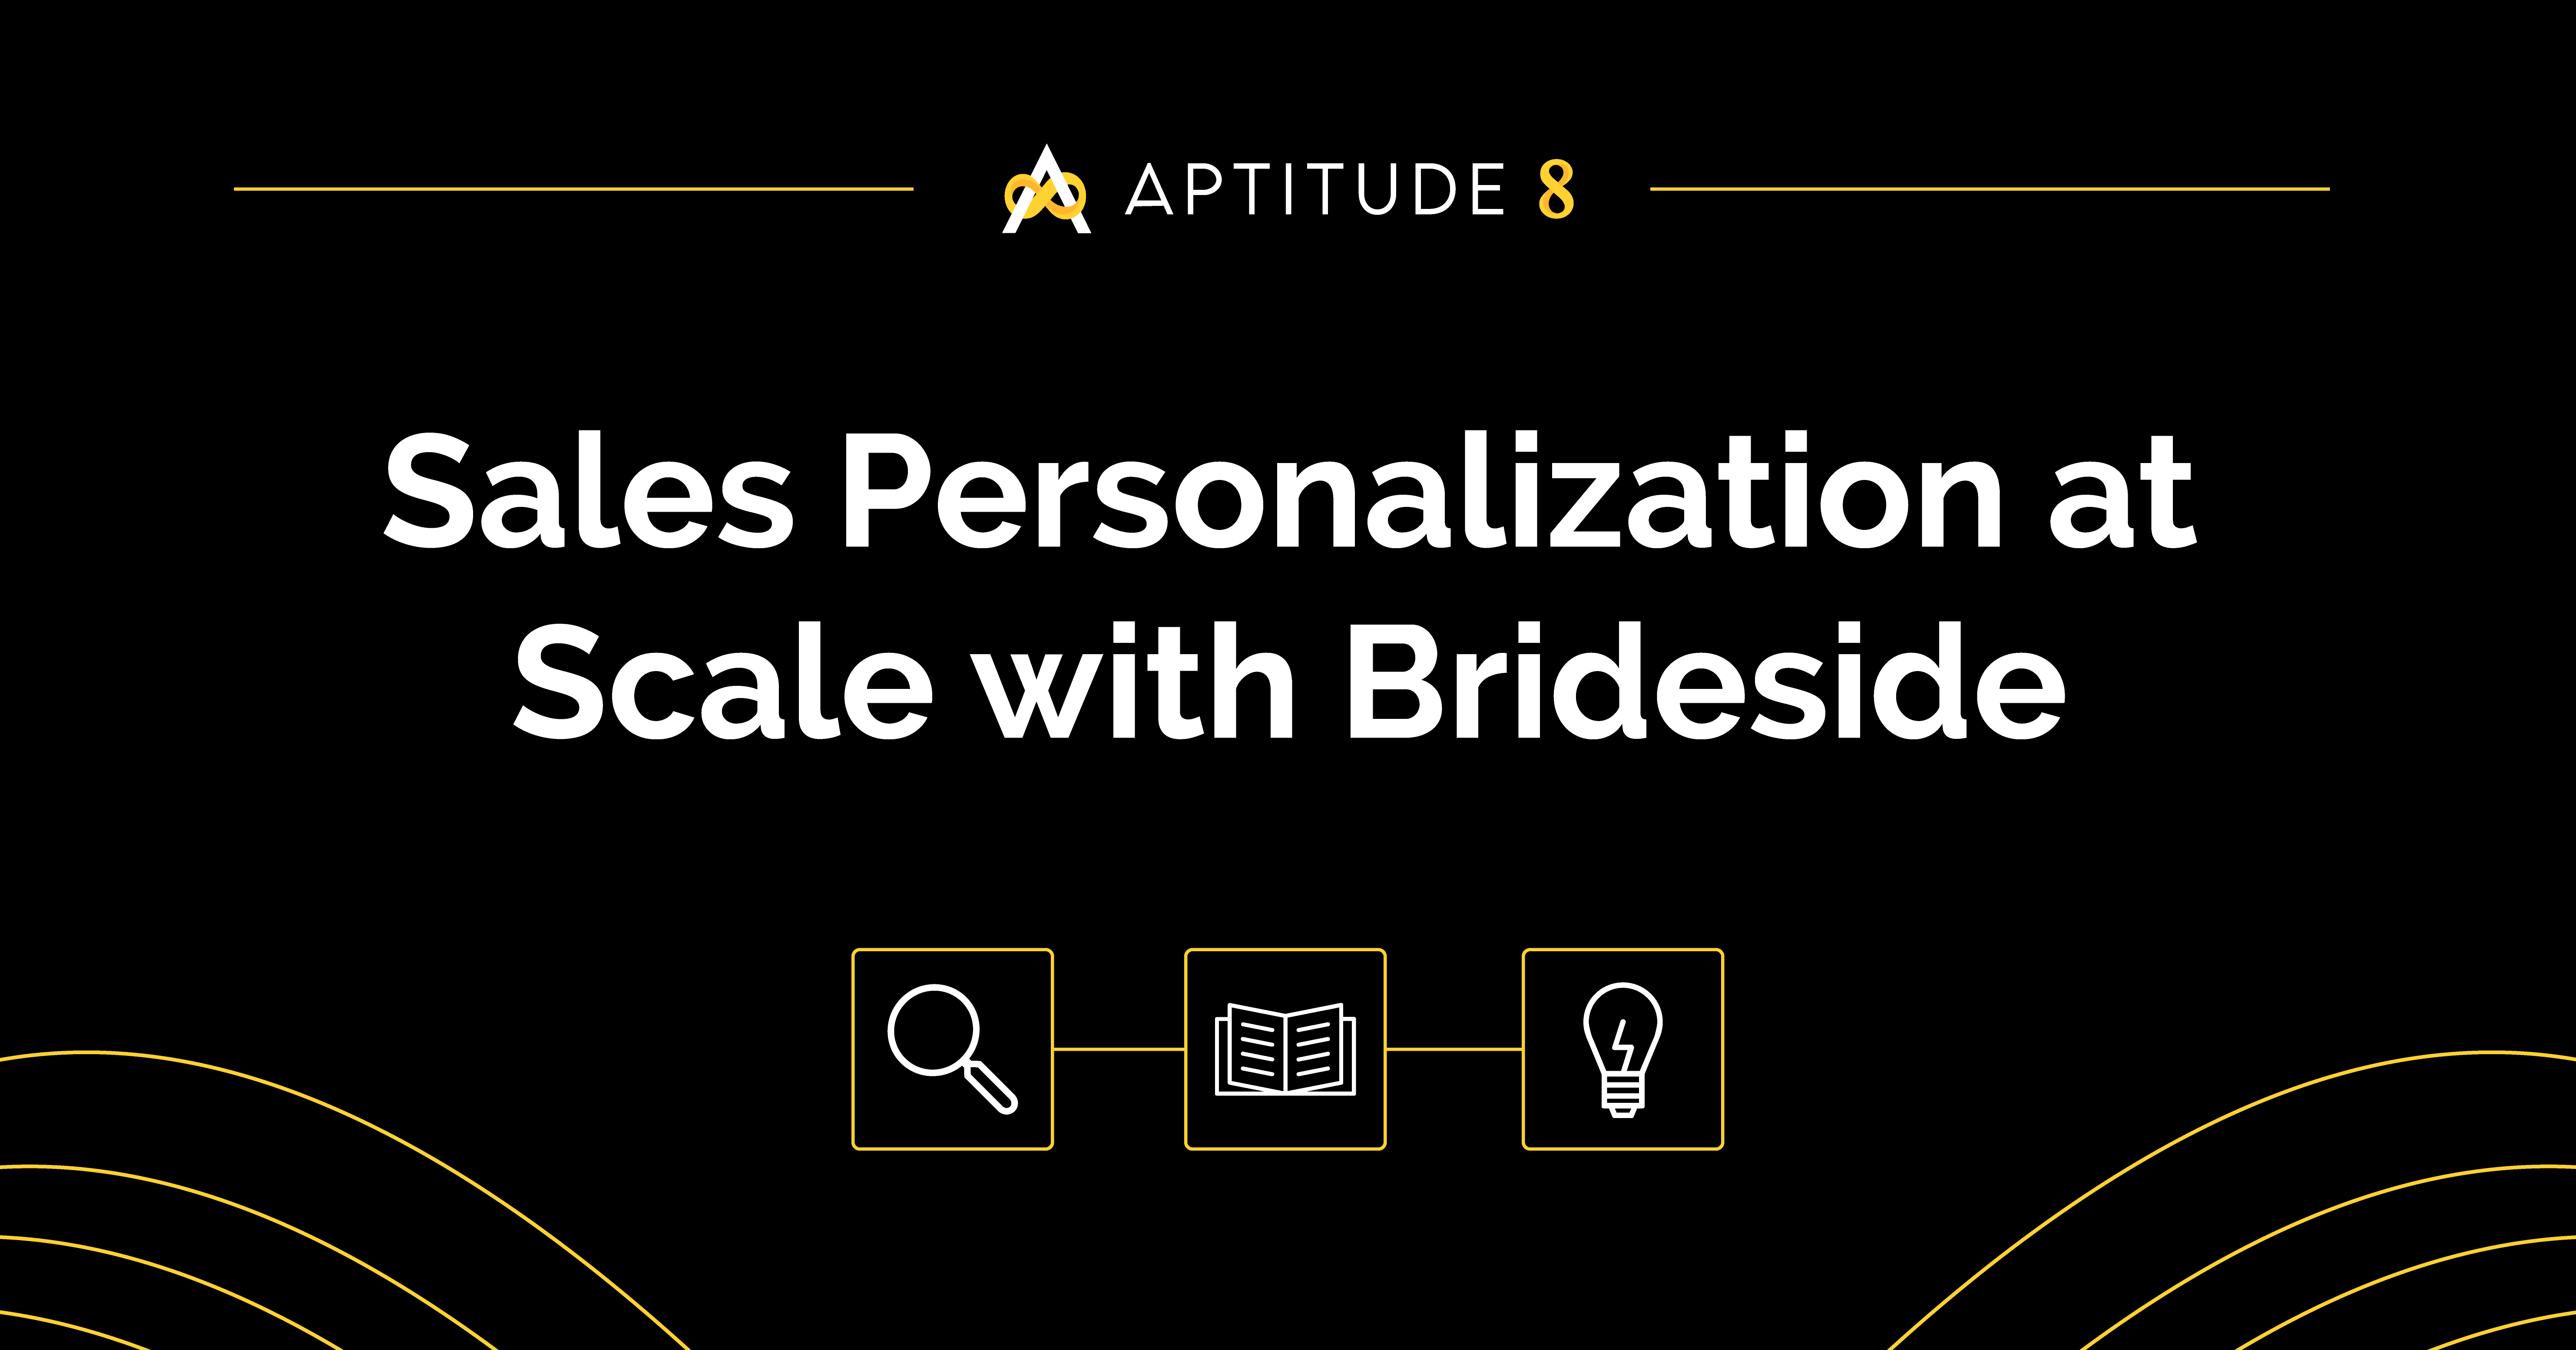 Sales Personalization at Scale with Brideside